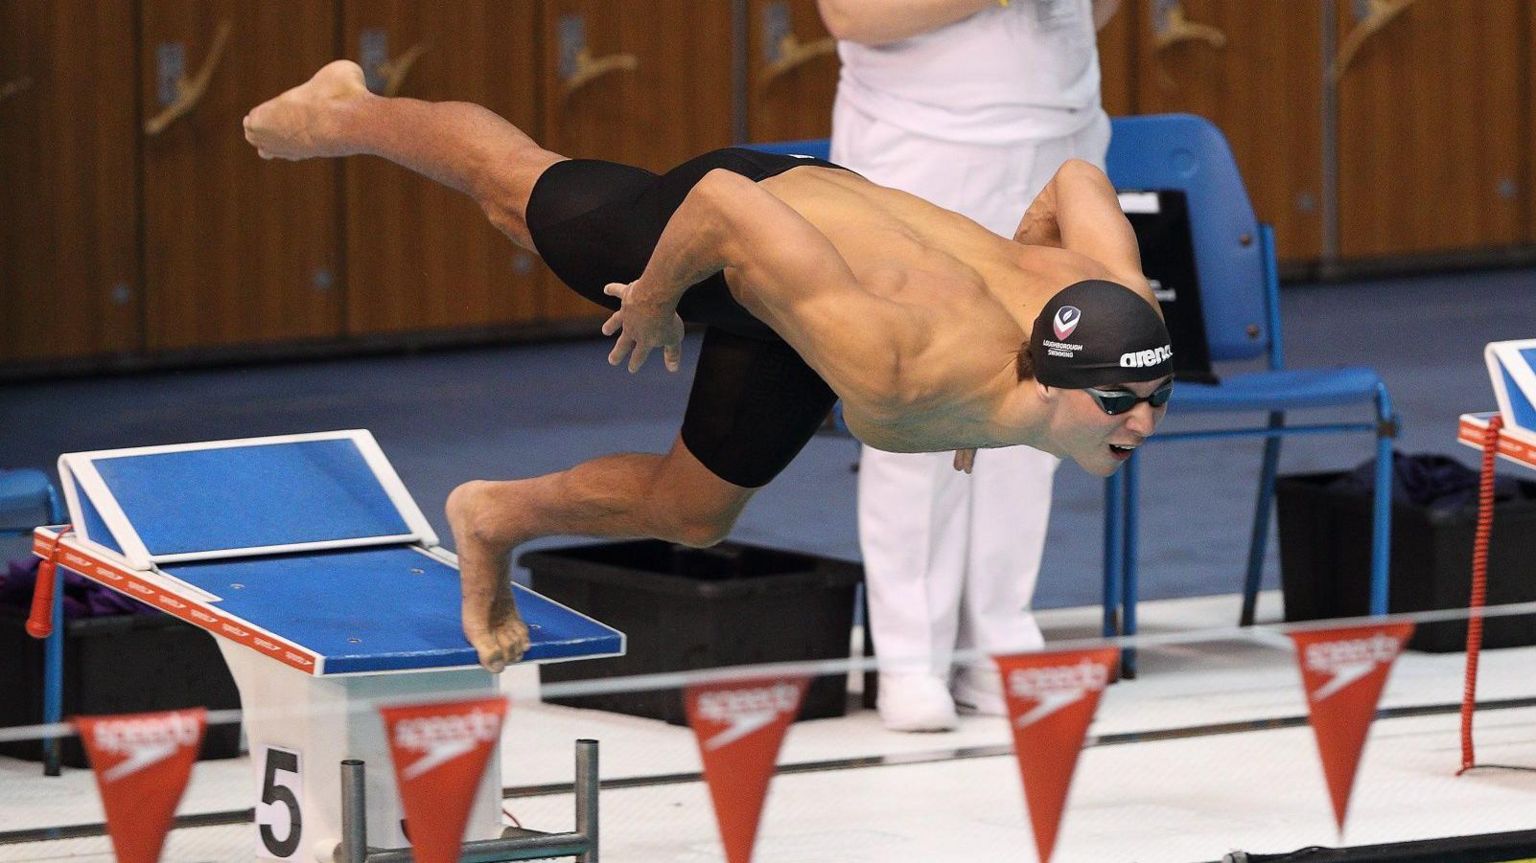 Alex Cohoon dives into the pool